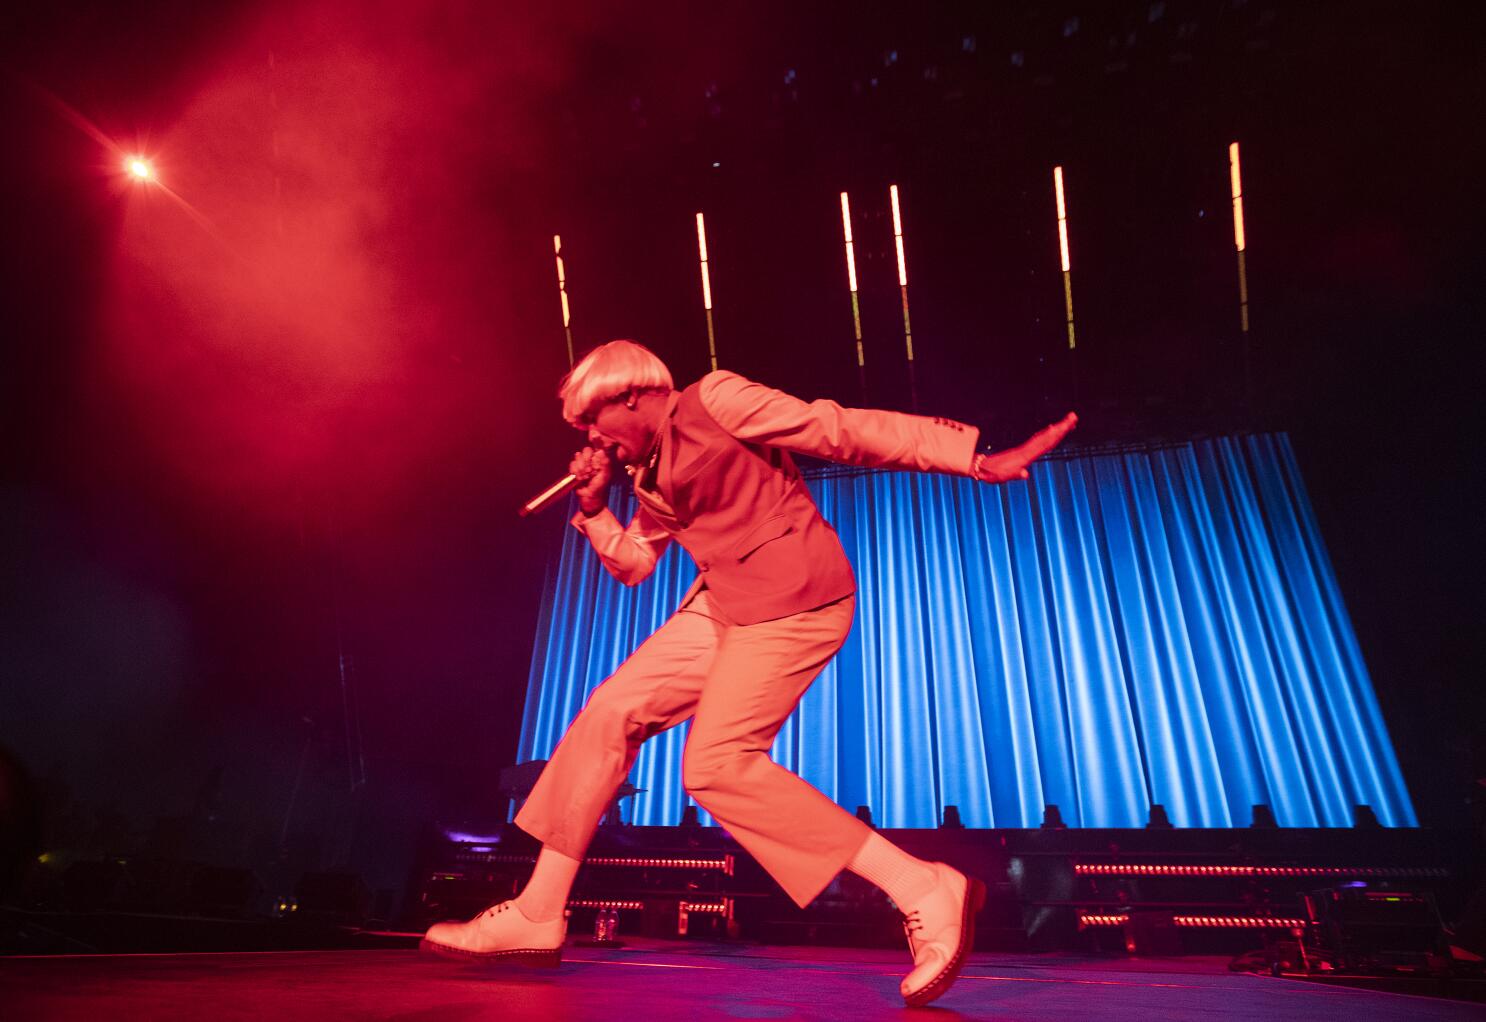 Camp Flog Gnaw 2018: SZA, Tyler, the Creator and Kali Uchis highlights of  Day 1 – Daily News